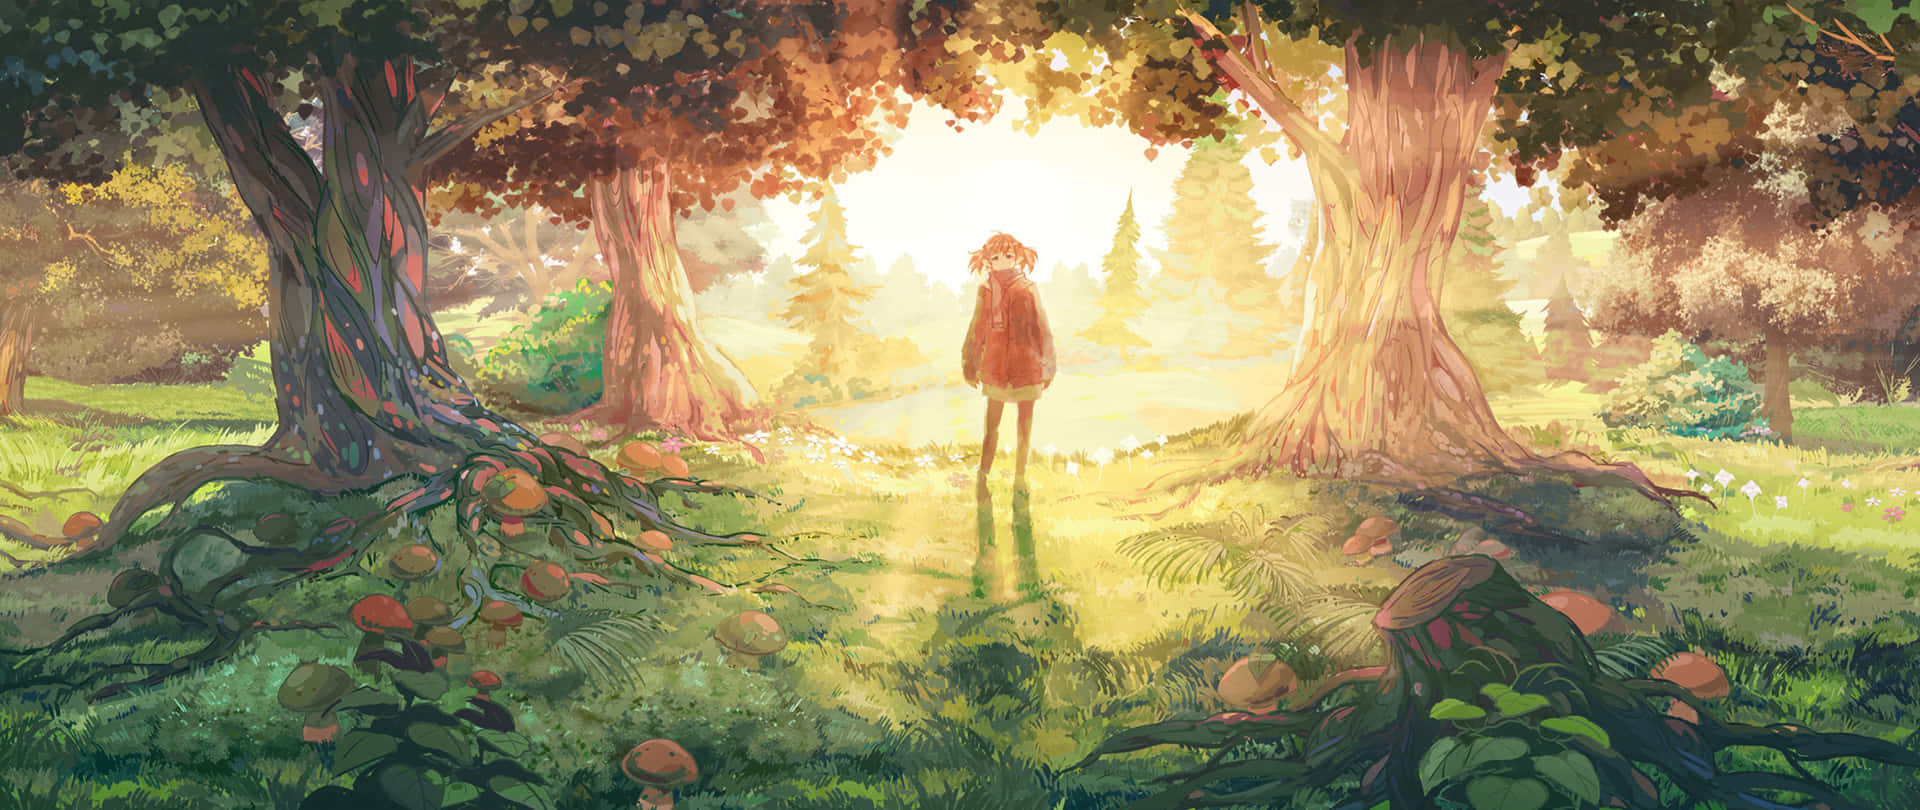 Dual Monitor Anime Girl Forest Wallpaper